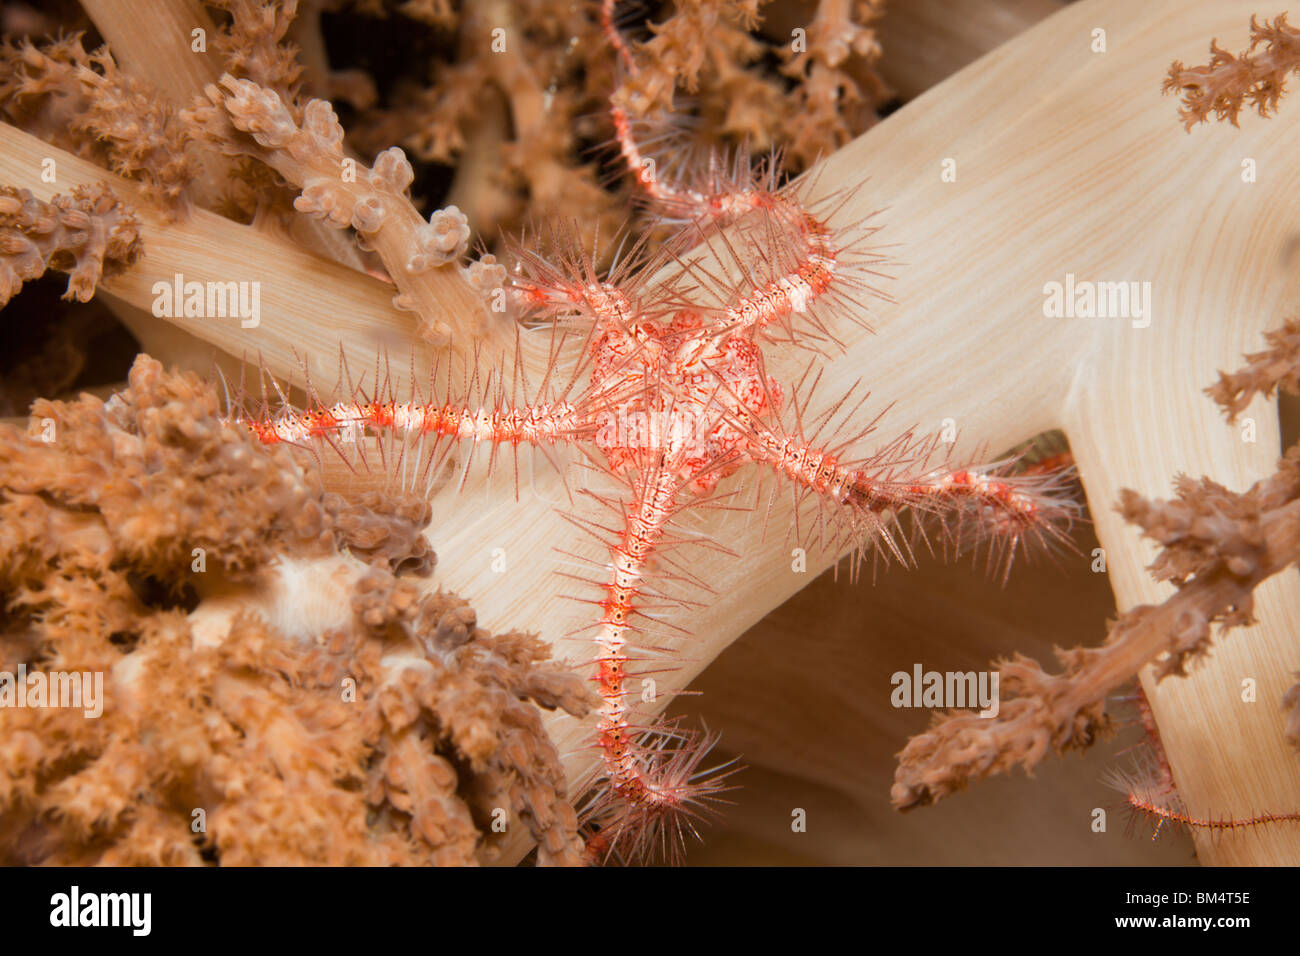 Red Star fragile, Ophiuroidea Raja Ampat, Papua occidentale, in Indonesia Foto Stock